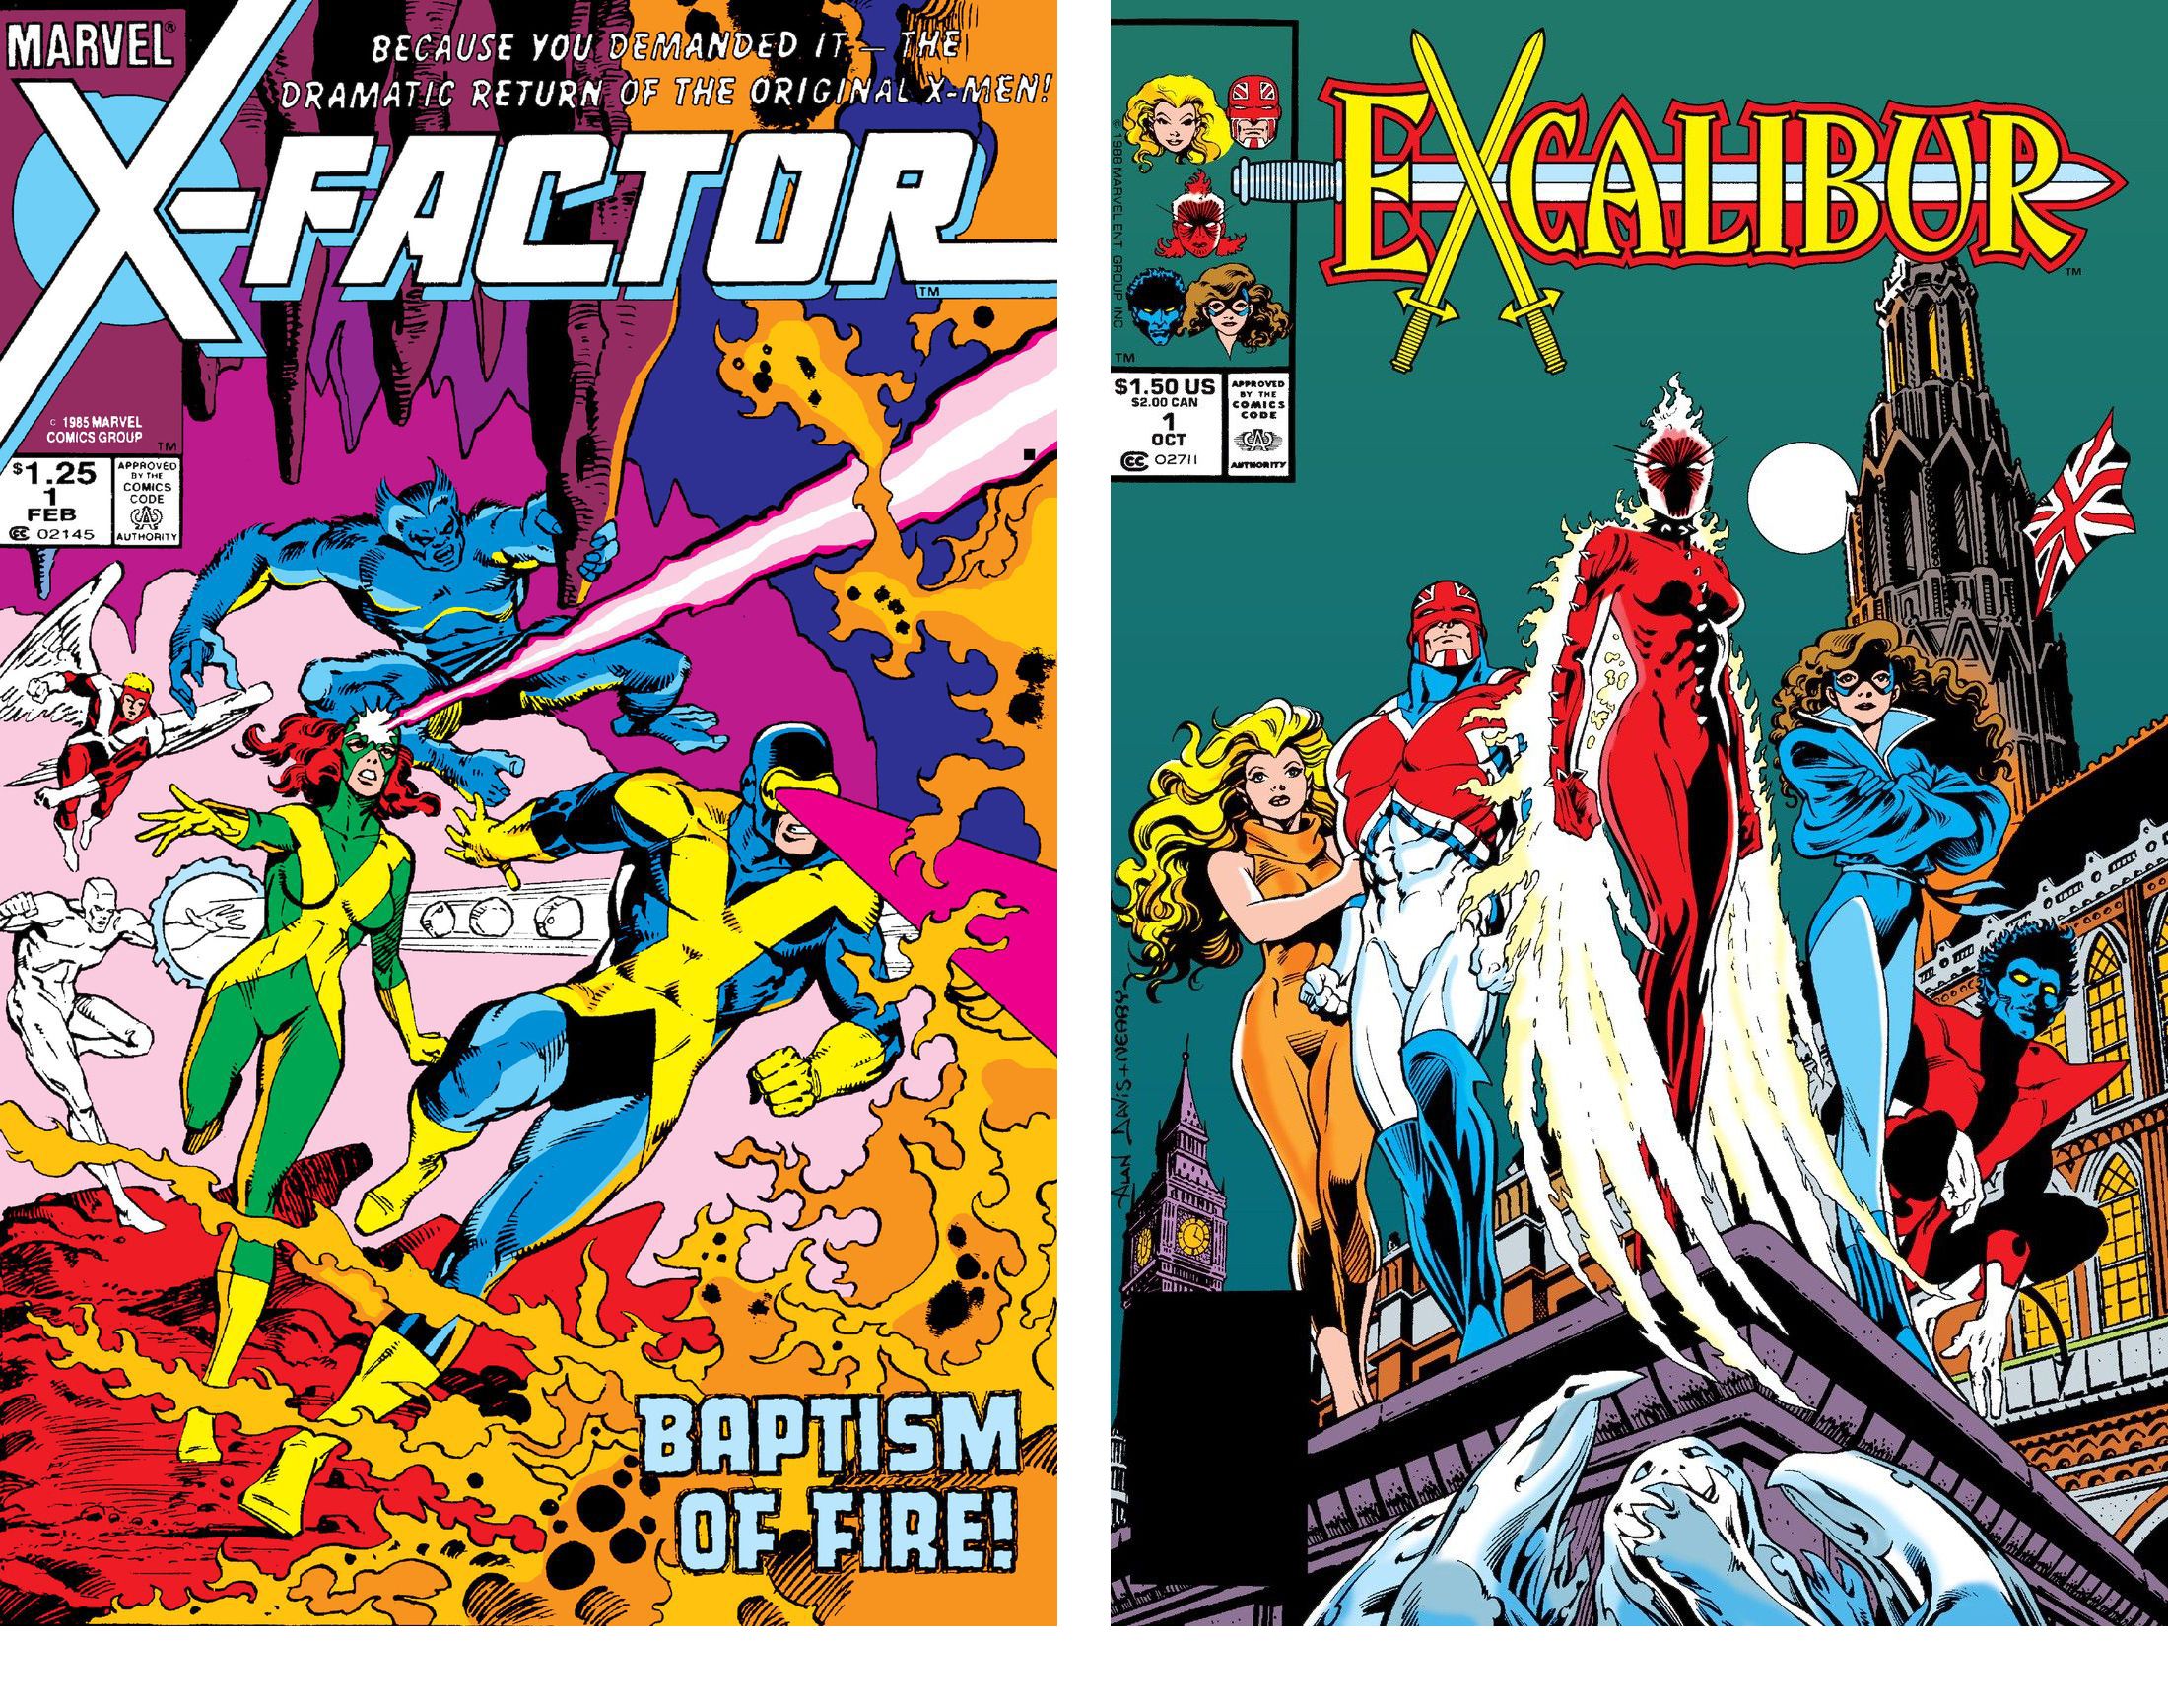 X-Factor launched in 1986 followed by Excalibur in 1988